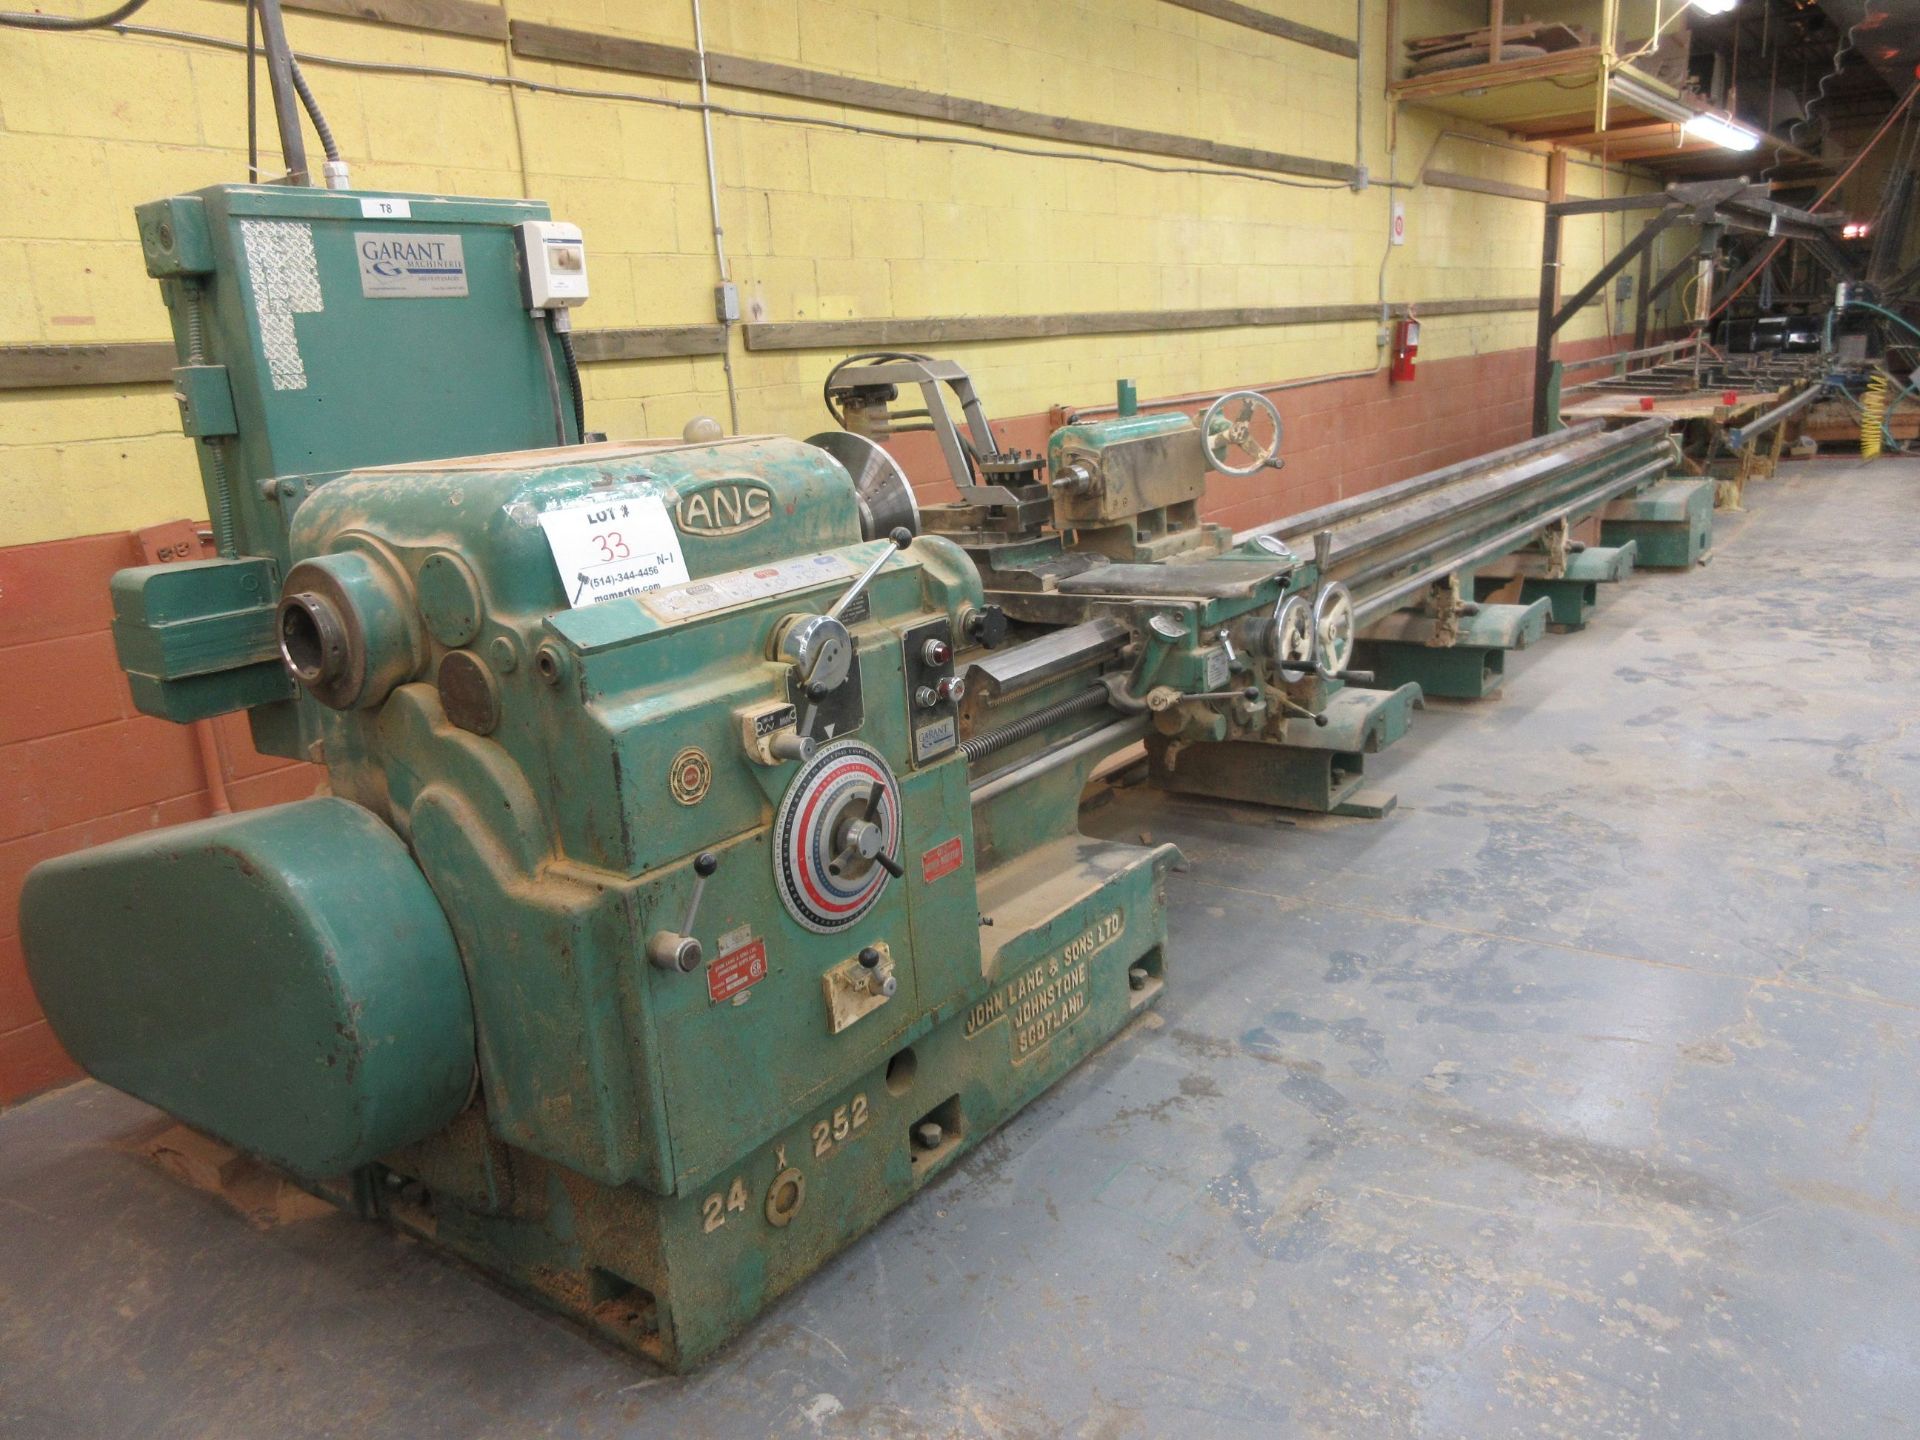 JOHN LANG & SONS, 20ft lathe, Mod: 10B2, 600 volts (SUBJECT TO BANK APPROVAL)